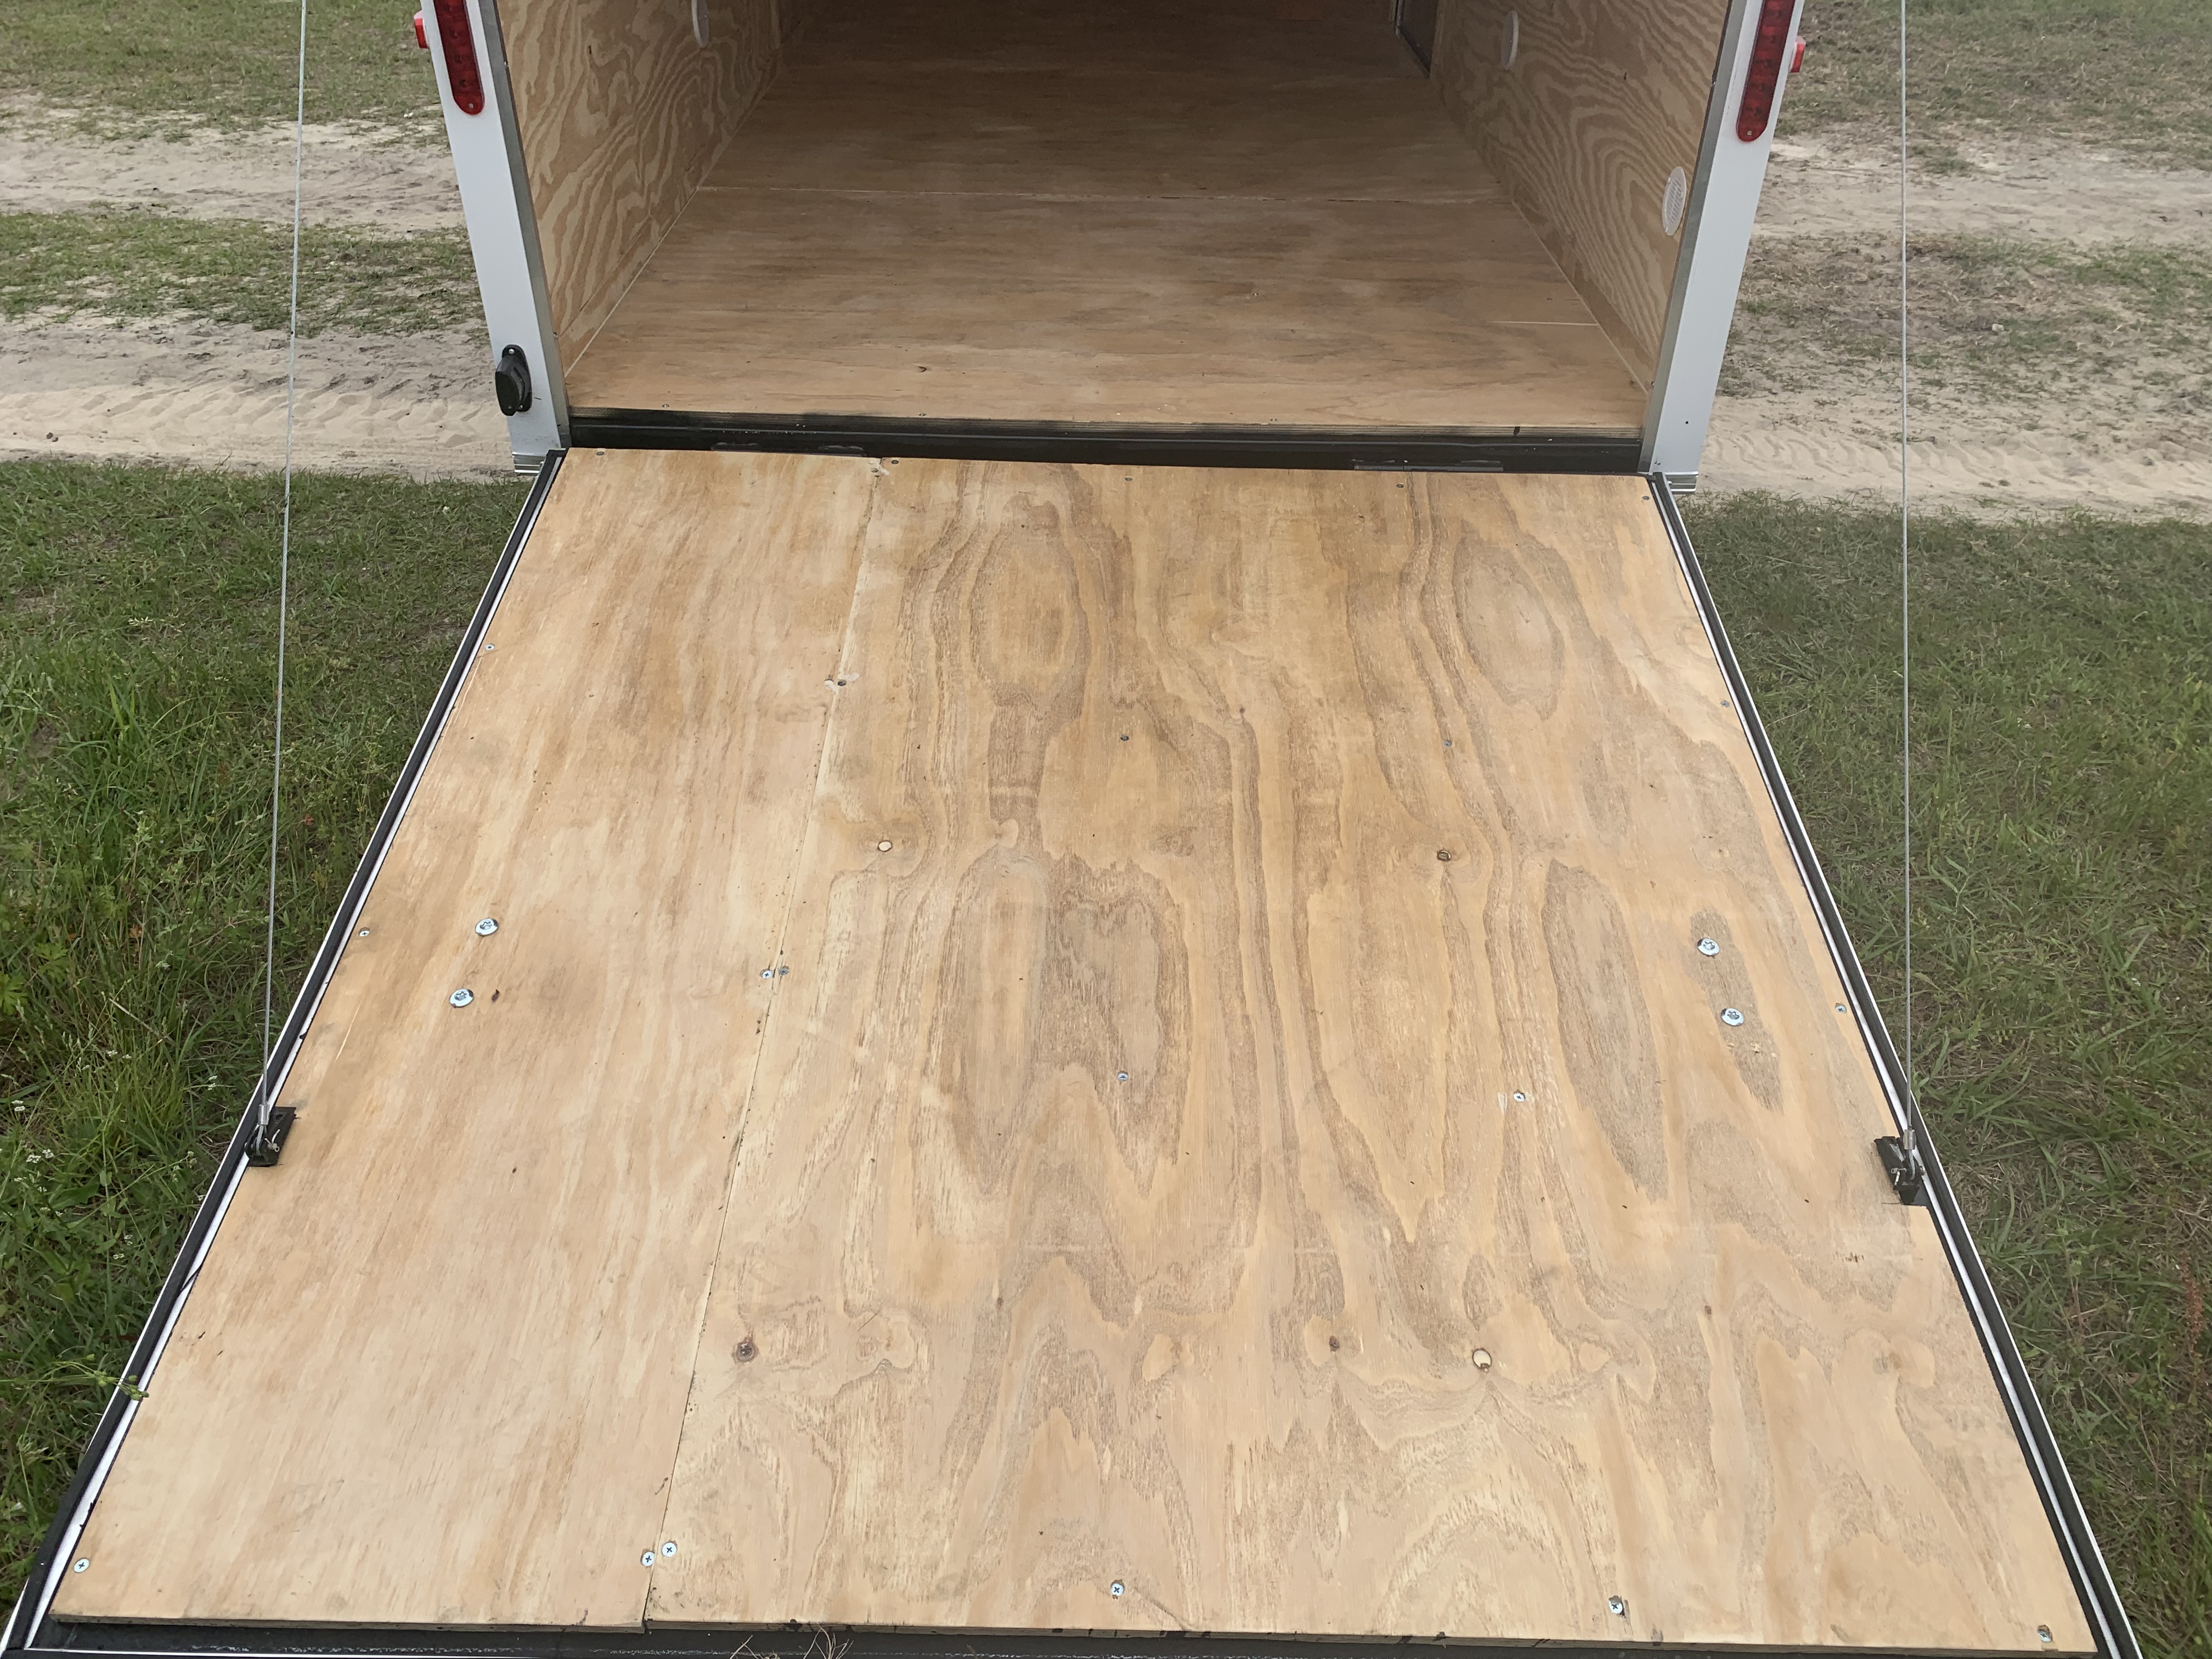 6x12 Single Axle Cargo Trailer - Best Quality At The Best PriceTriple A